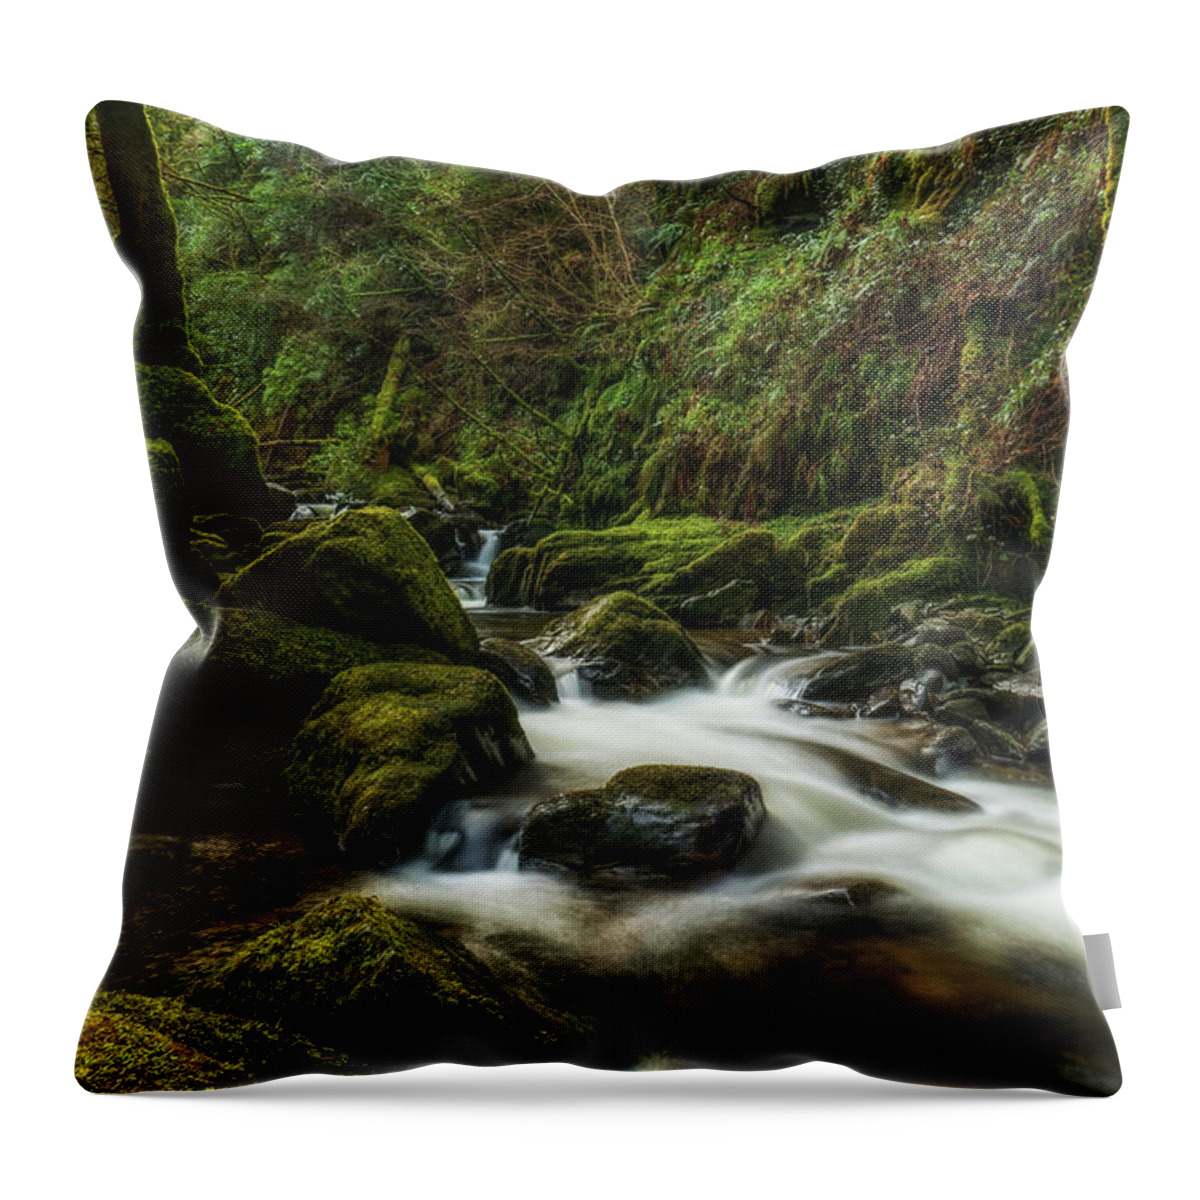 Ireland Throw Pillow featuring the photograph Torc Waterfall by Arthur Oleary